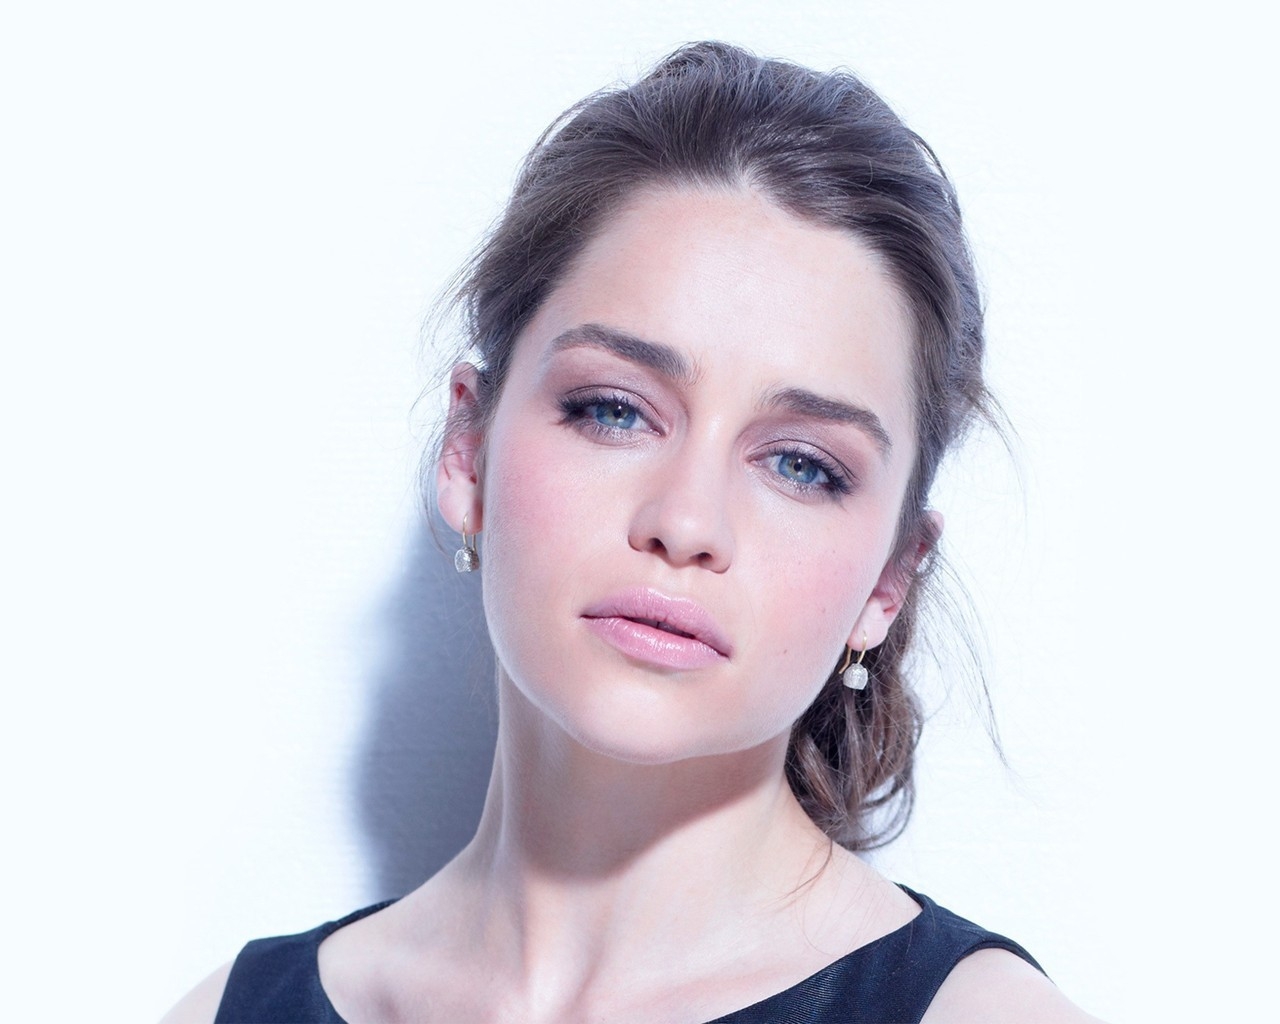 Emilia Clarke Game of Thrones for 1280 x 1024 resolution